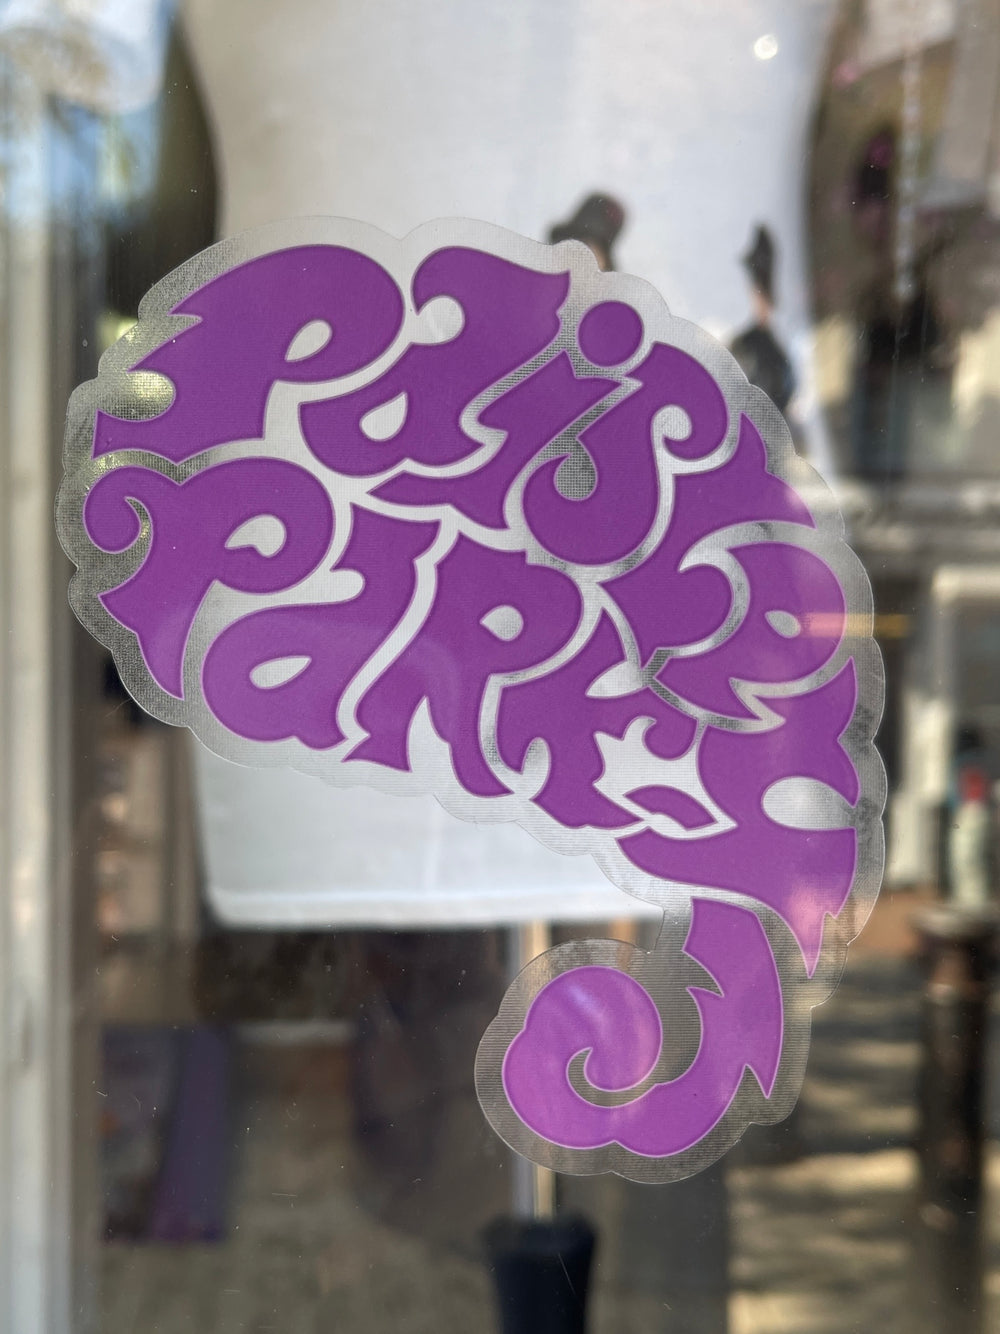 Prince – Paisley Park Official Window Decal Brand New Purple Logo NEW